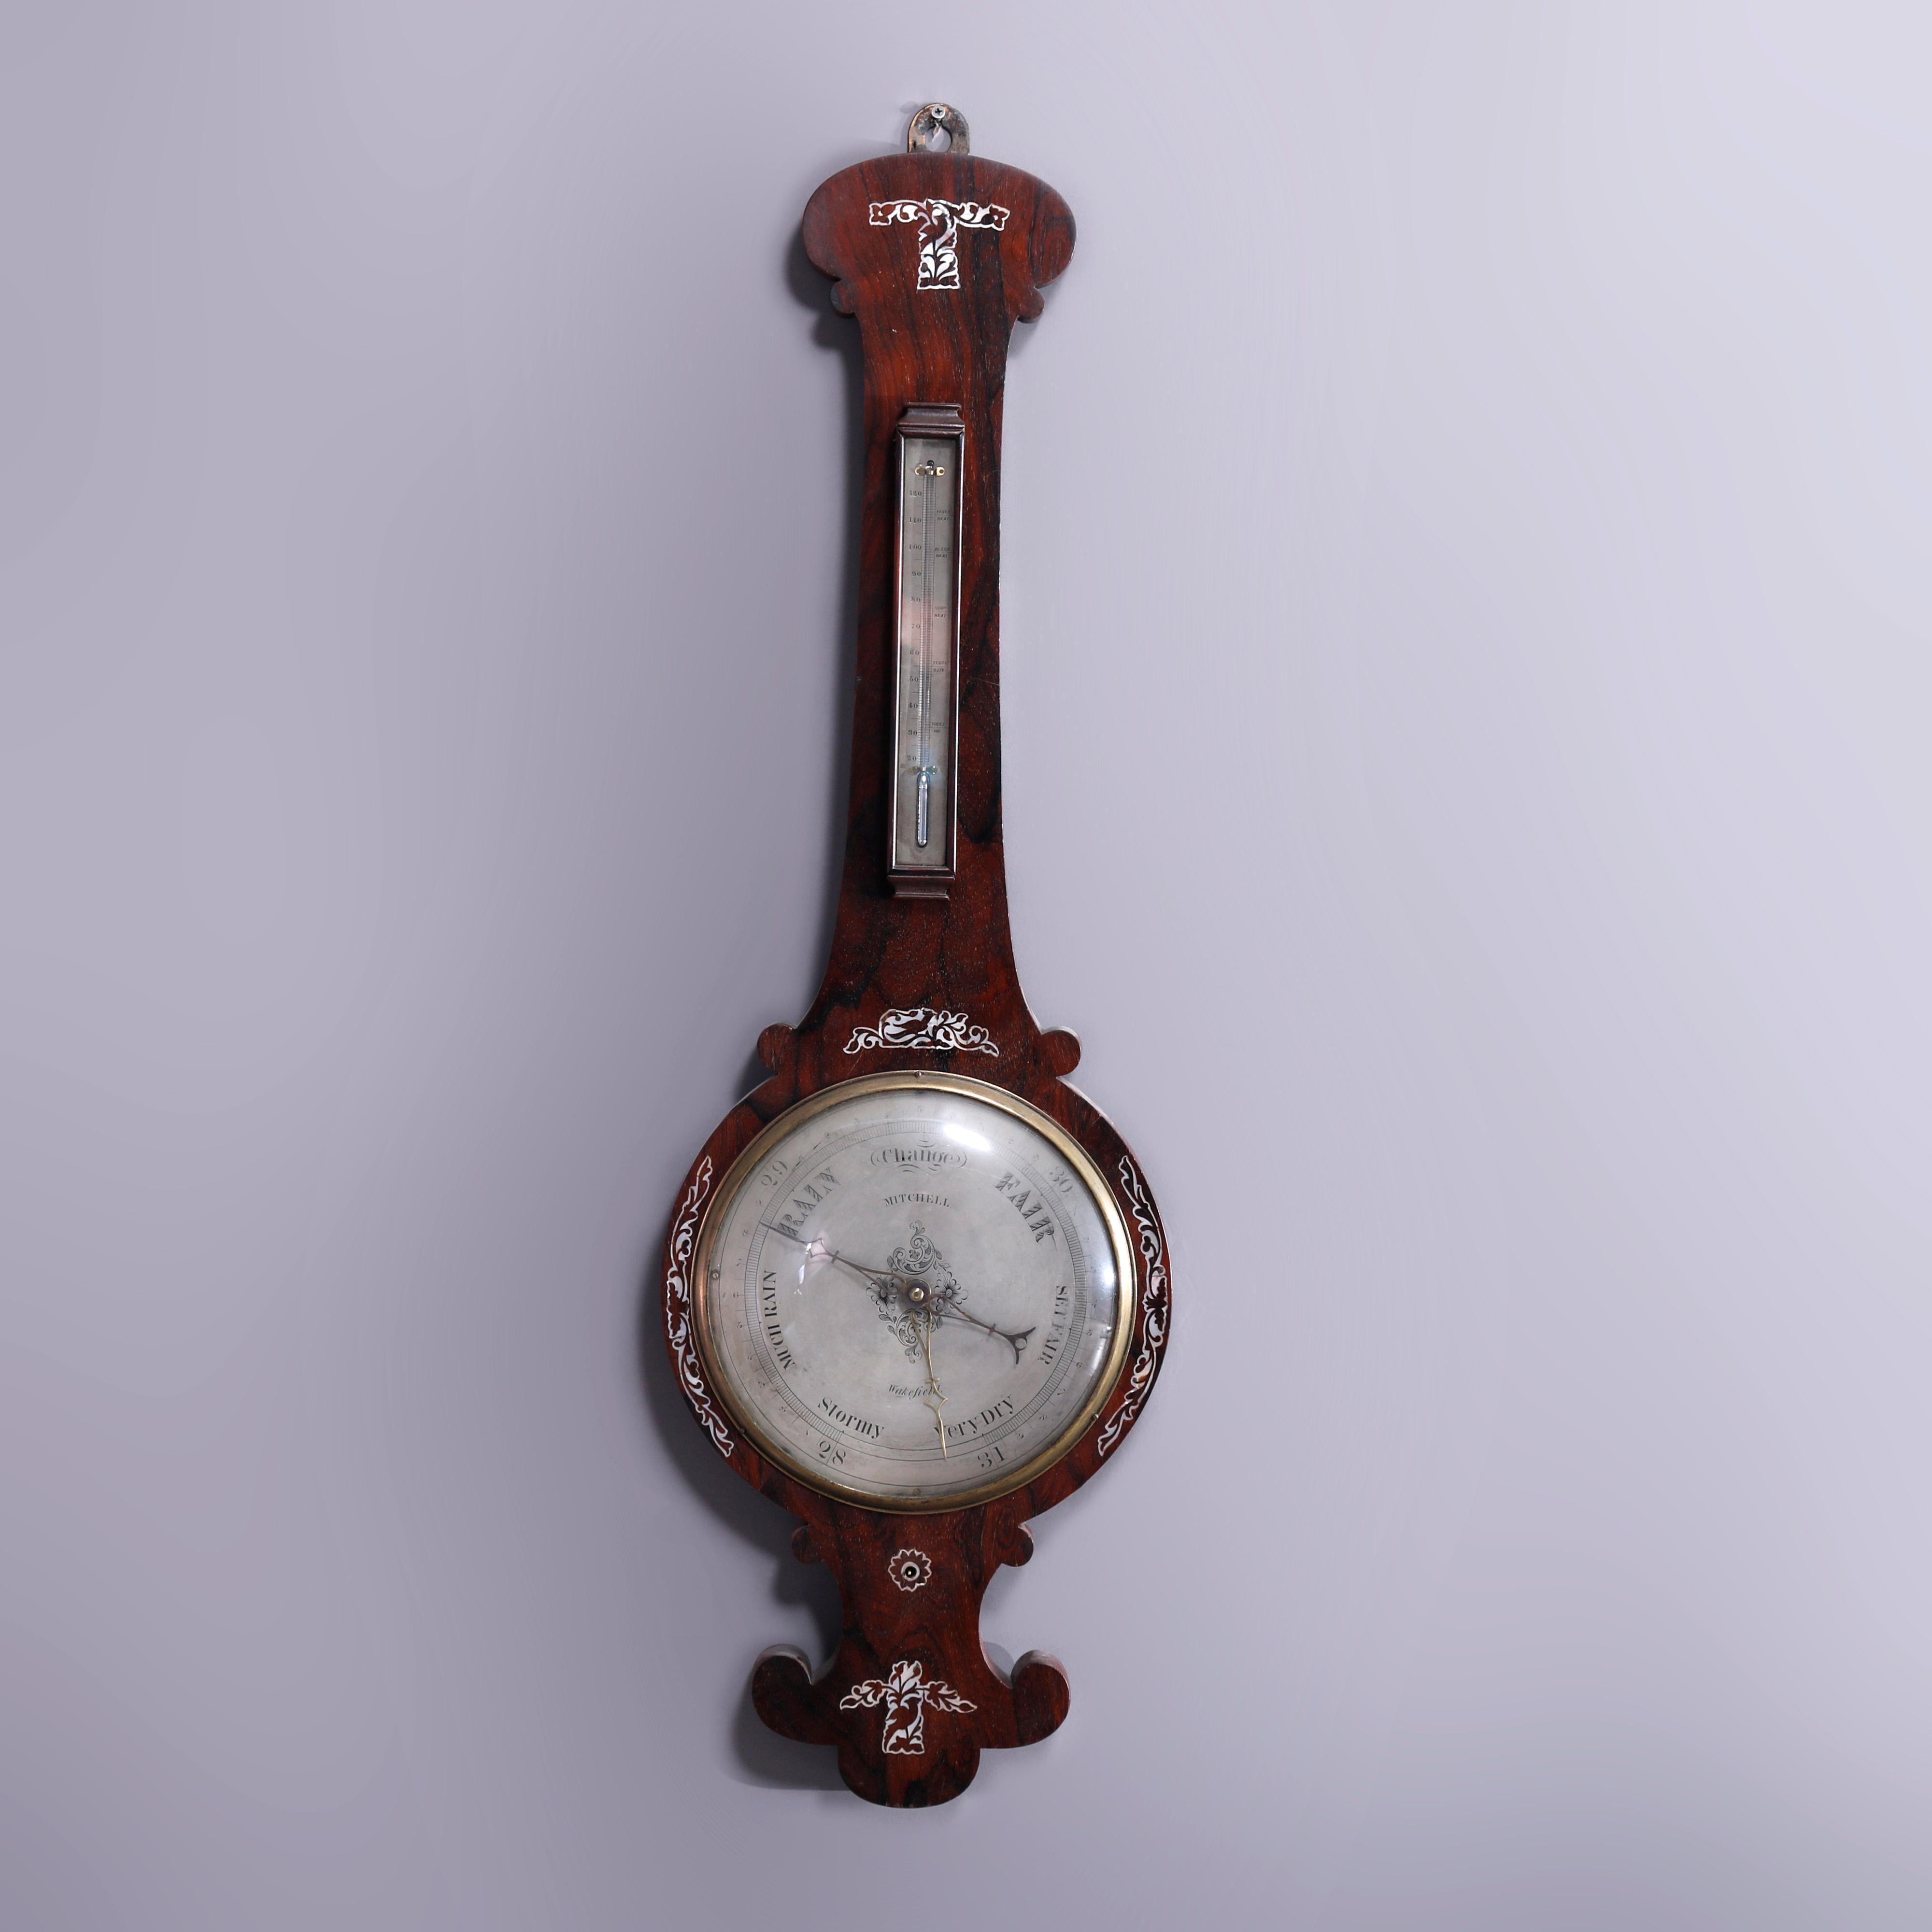 An antique barometer with thermometer by Mitchell of Wakefield, MA offers shaped rosewood case having foliate and scroll mother or pearl inlaid design, face signed with maker as photographed, c1890

Measures - 41